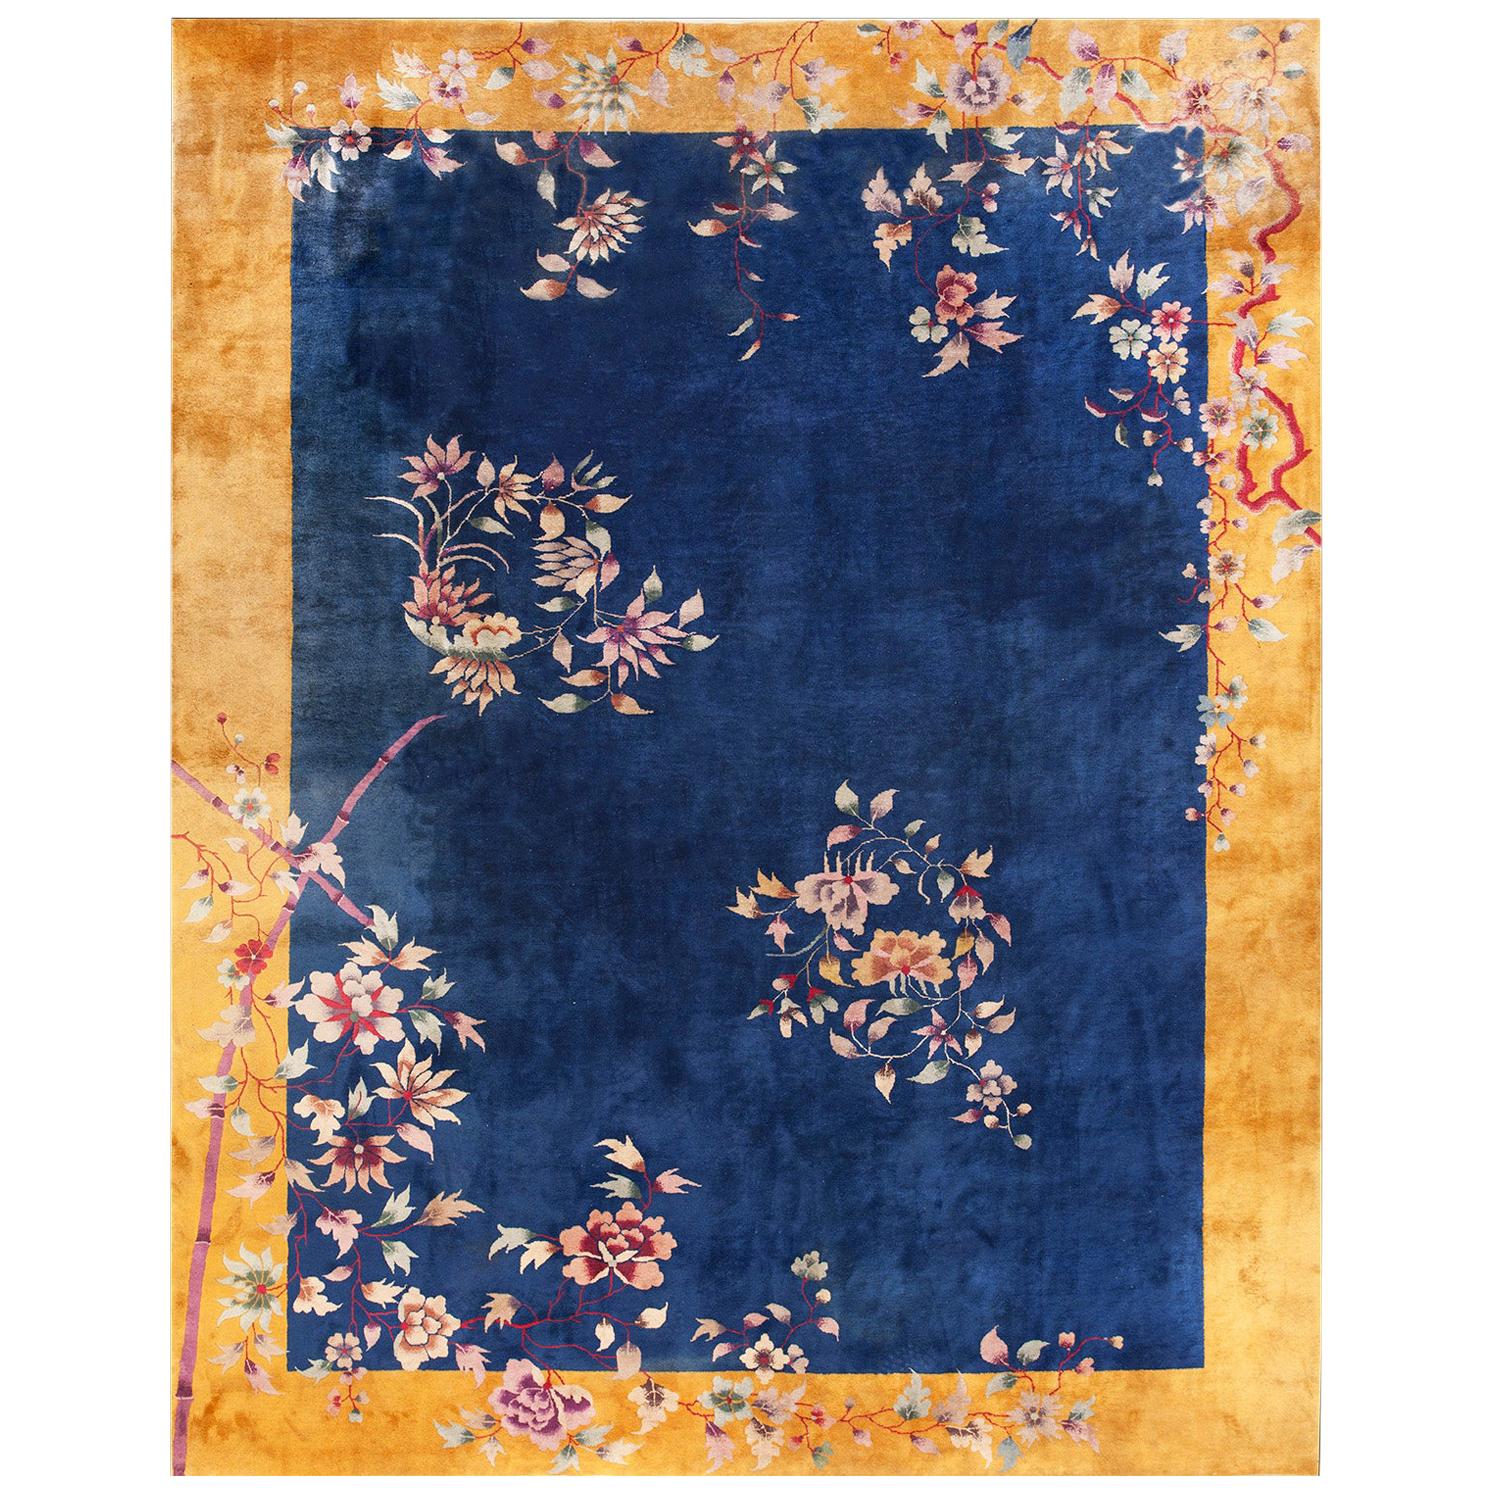 1920s Chinese Art Deco Carpet ( 8'10" x 11'4" - 270 x 345 ) For Sale